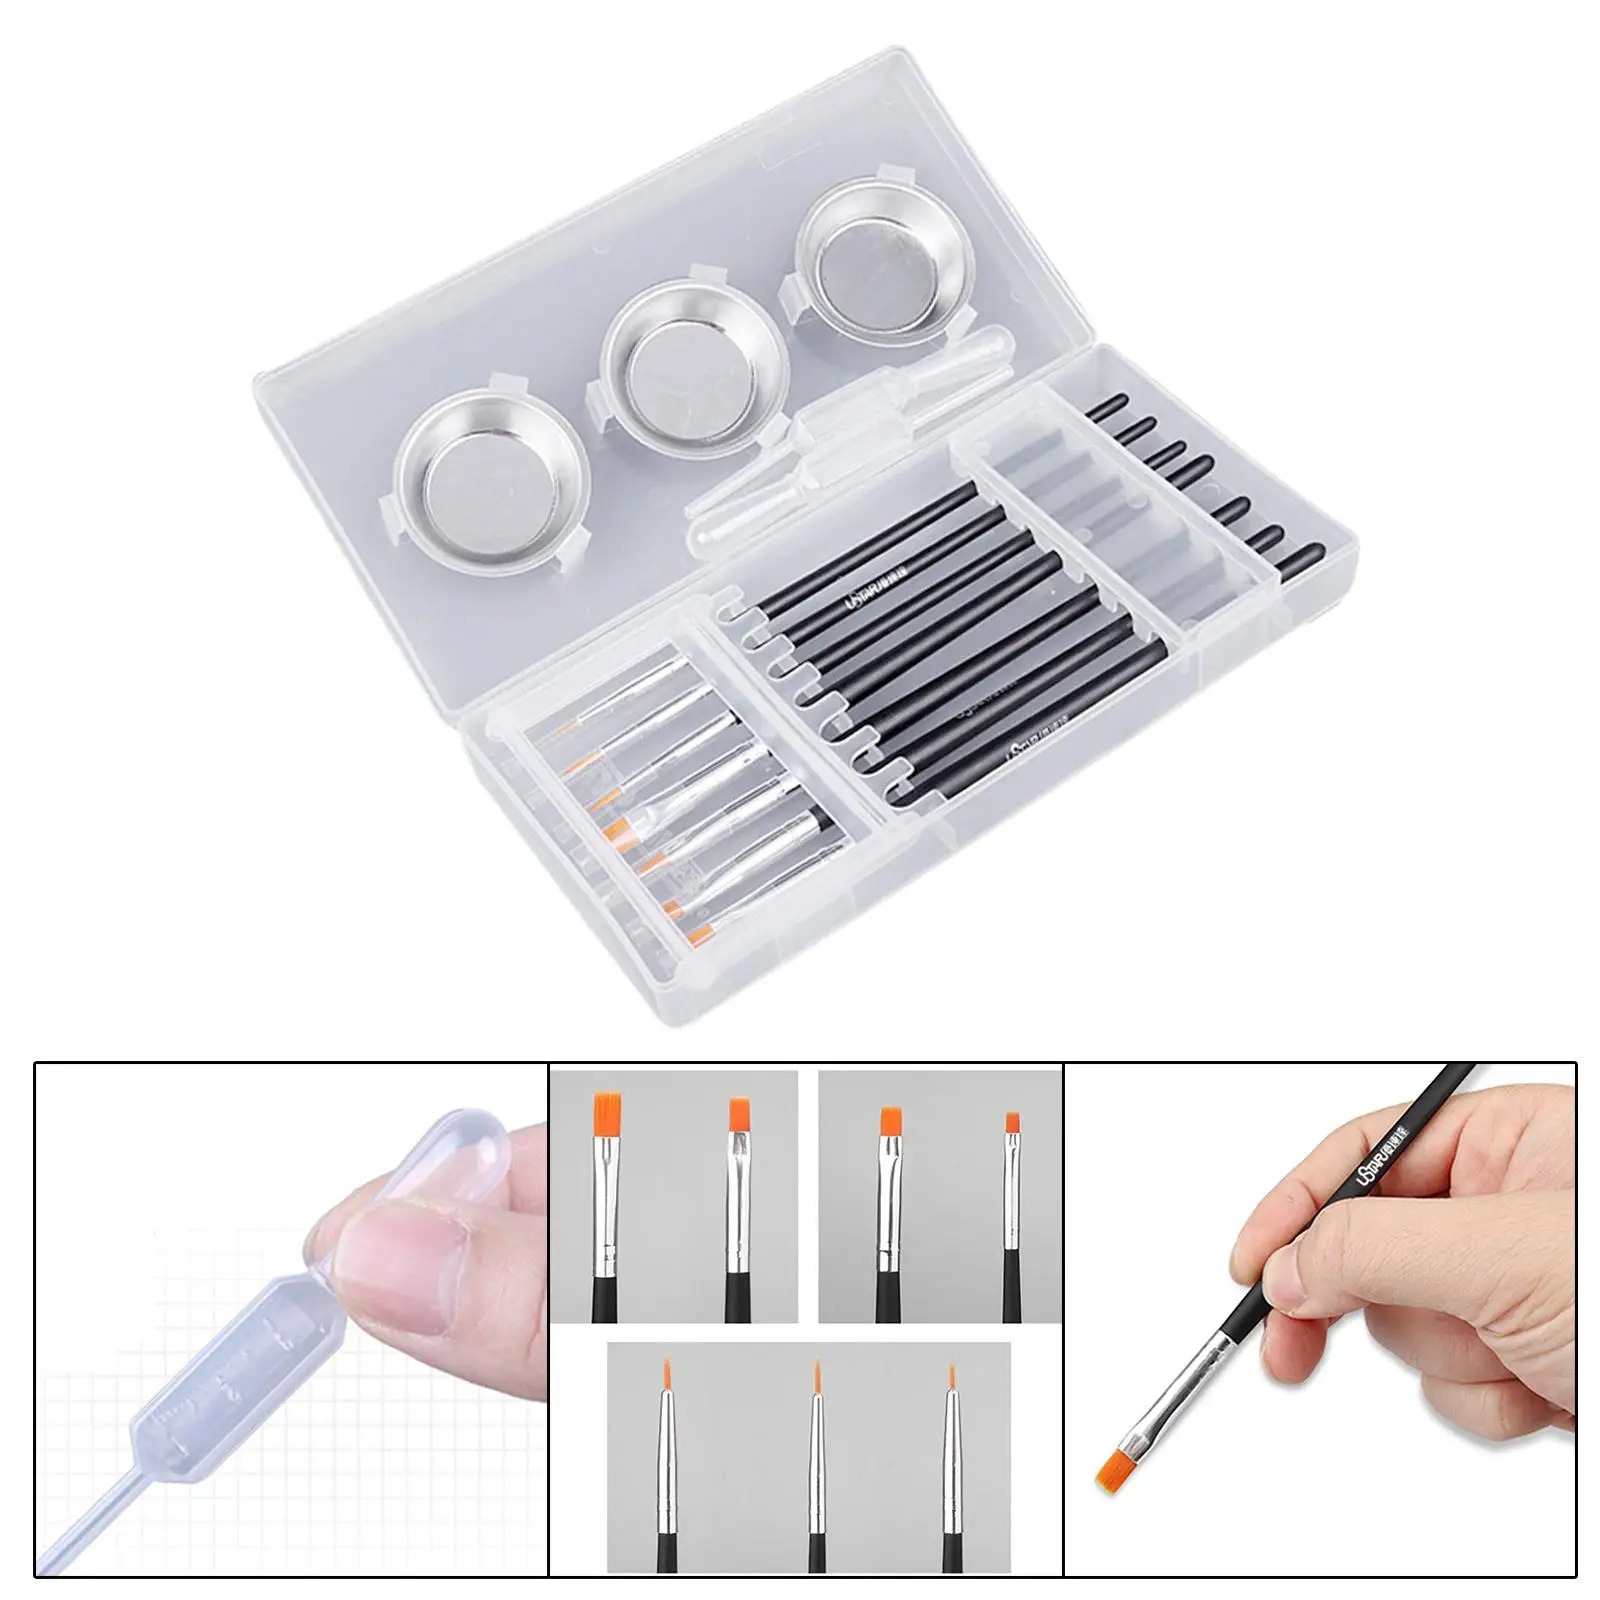 Paint Brushes Pallete Set Paint Tray Palettes for Kids or Adults DIY Crafts Model Building Tools Model Painting Hobby Paint